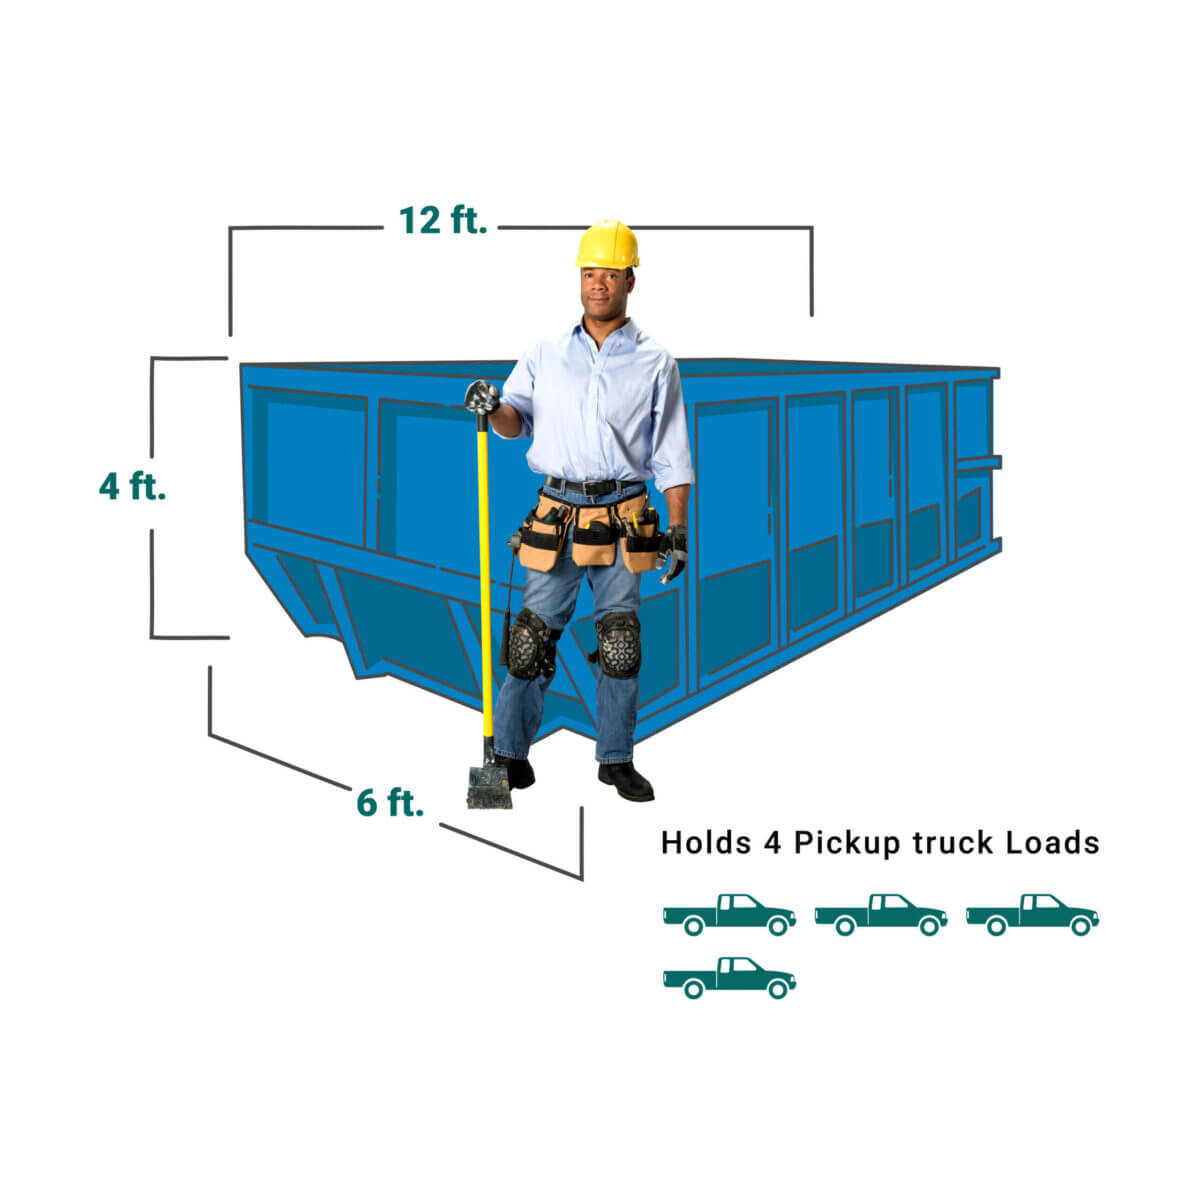 Photo of man standing in front of a blue heavy box dumpster. Photo shows dimensions of dumpster being 12 feet long, 4 feet high, and 6 feet wide. Lower corener of photos shows picture of four pickup trucks to represent a 10 cubic yard heavy box holding up to four pickup truck loads inside.